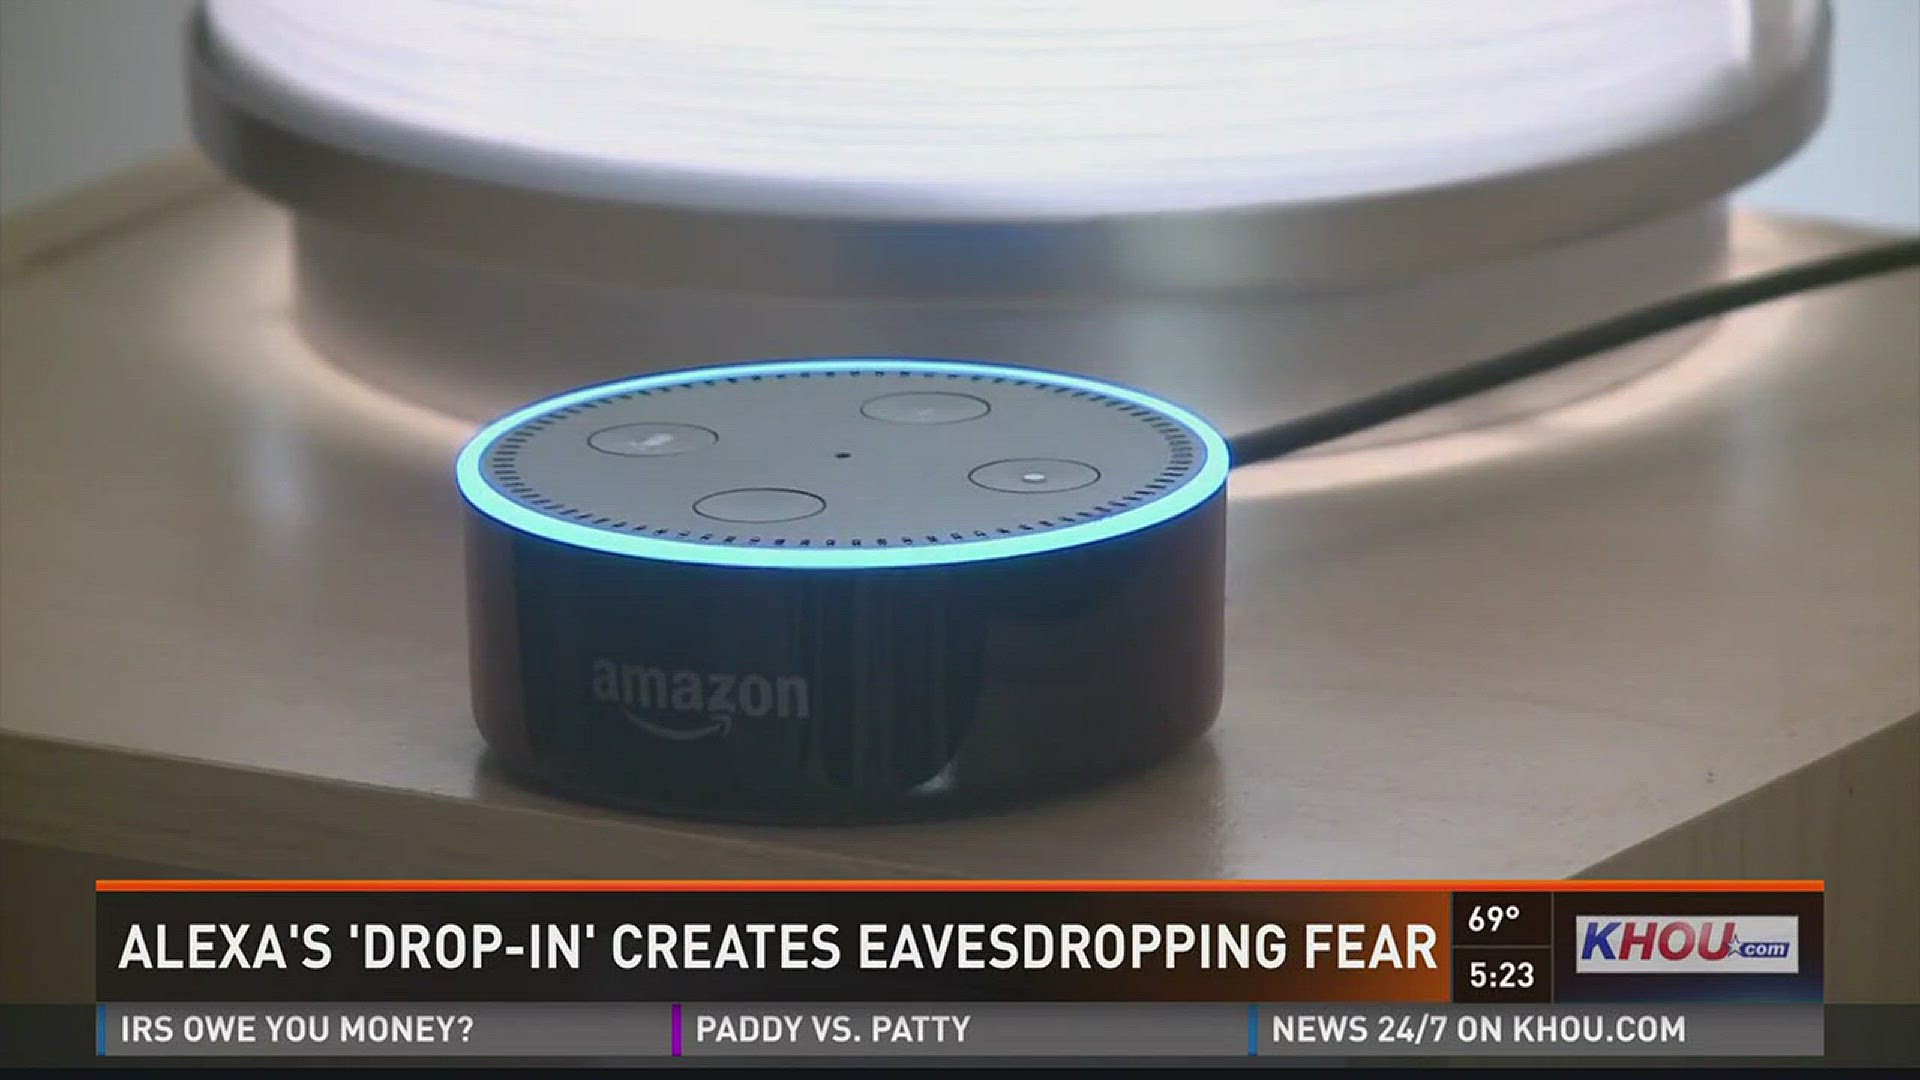 A feature on Amazon's Alexa that allows you to share your device with others has created an eavesdropping friend among users.